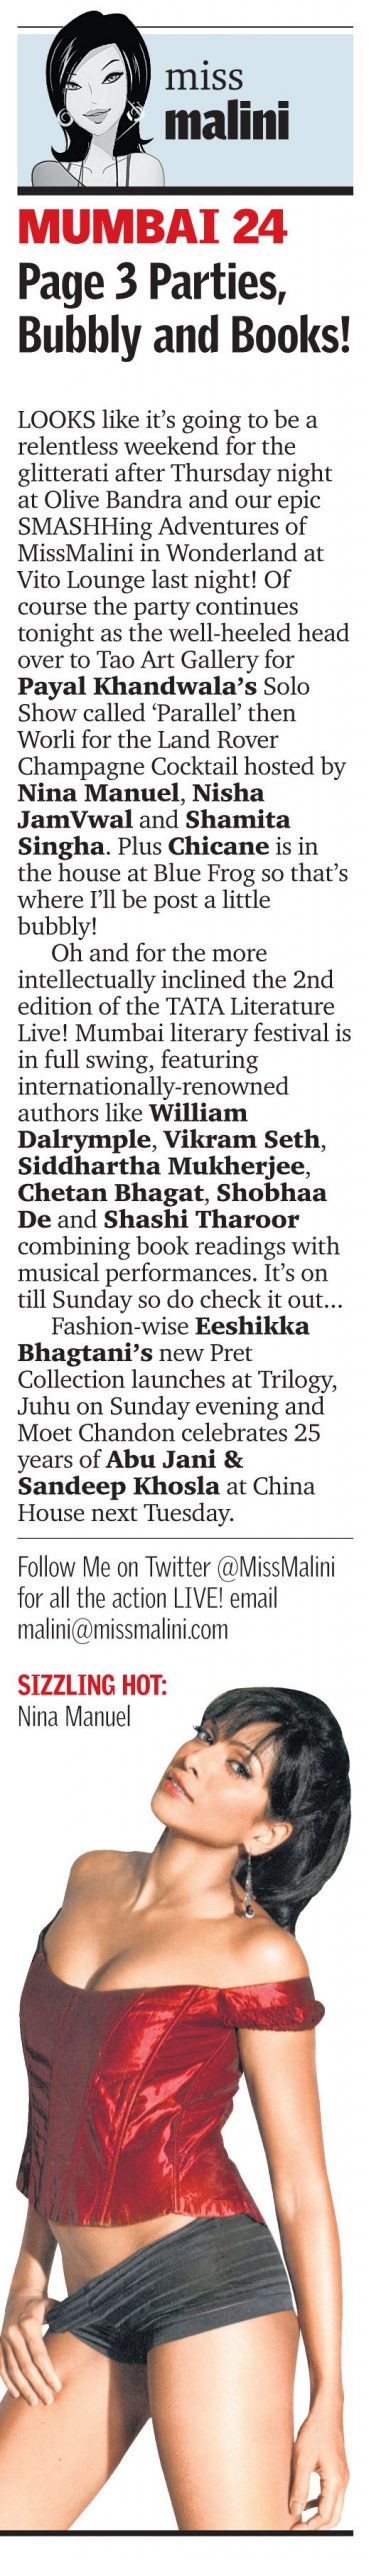 MissMalini in Mid Day: Page 3 Parties, Bubbly and Books!